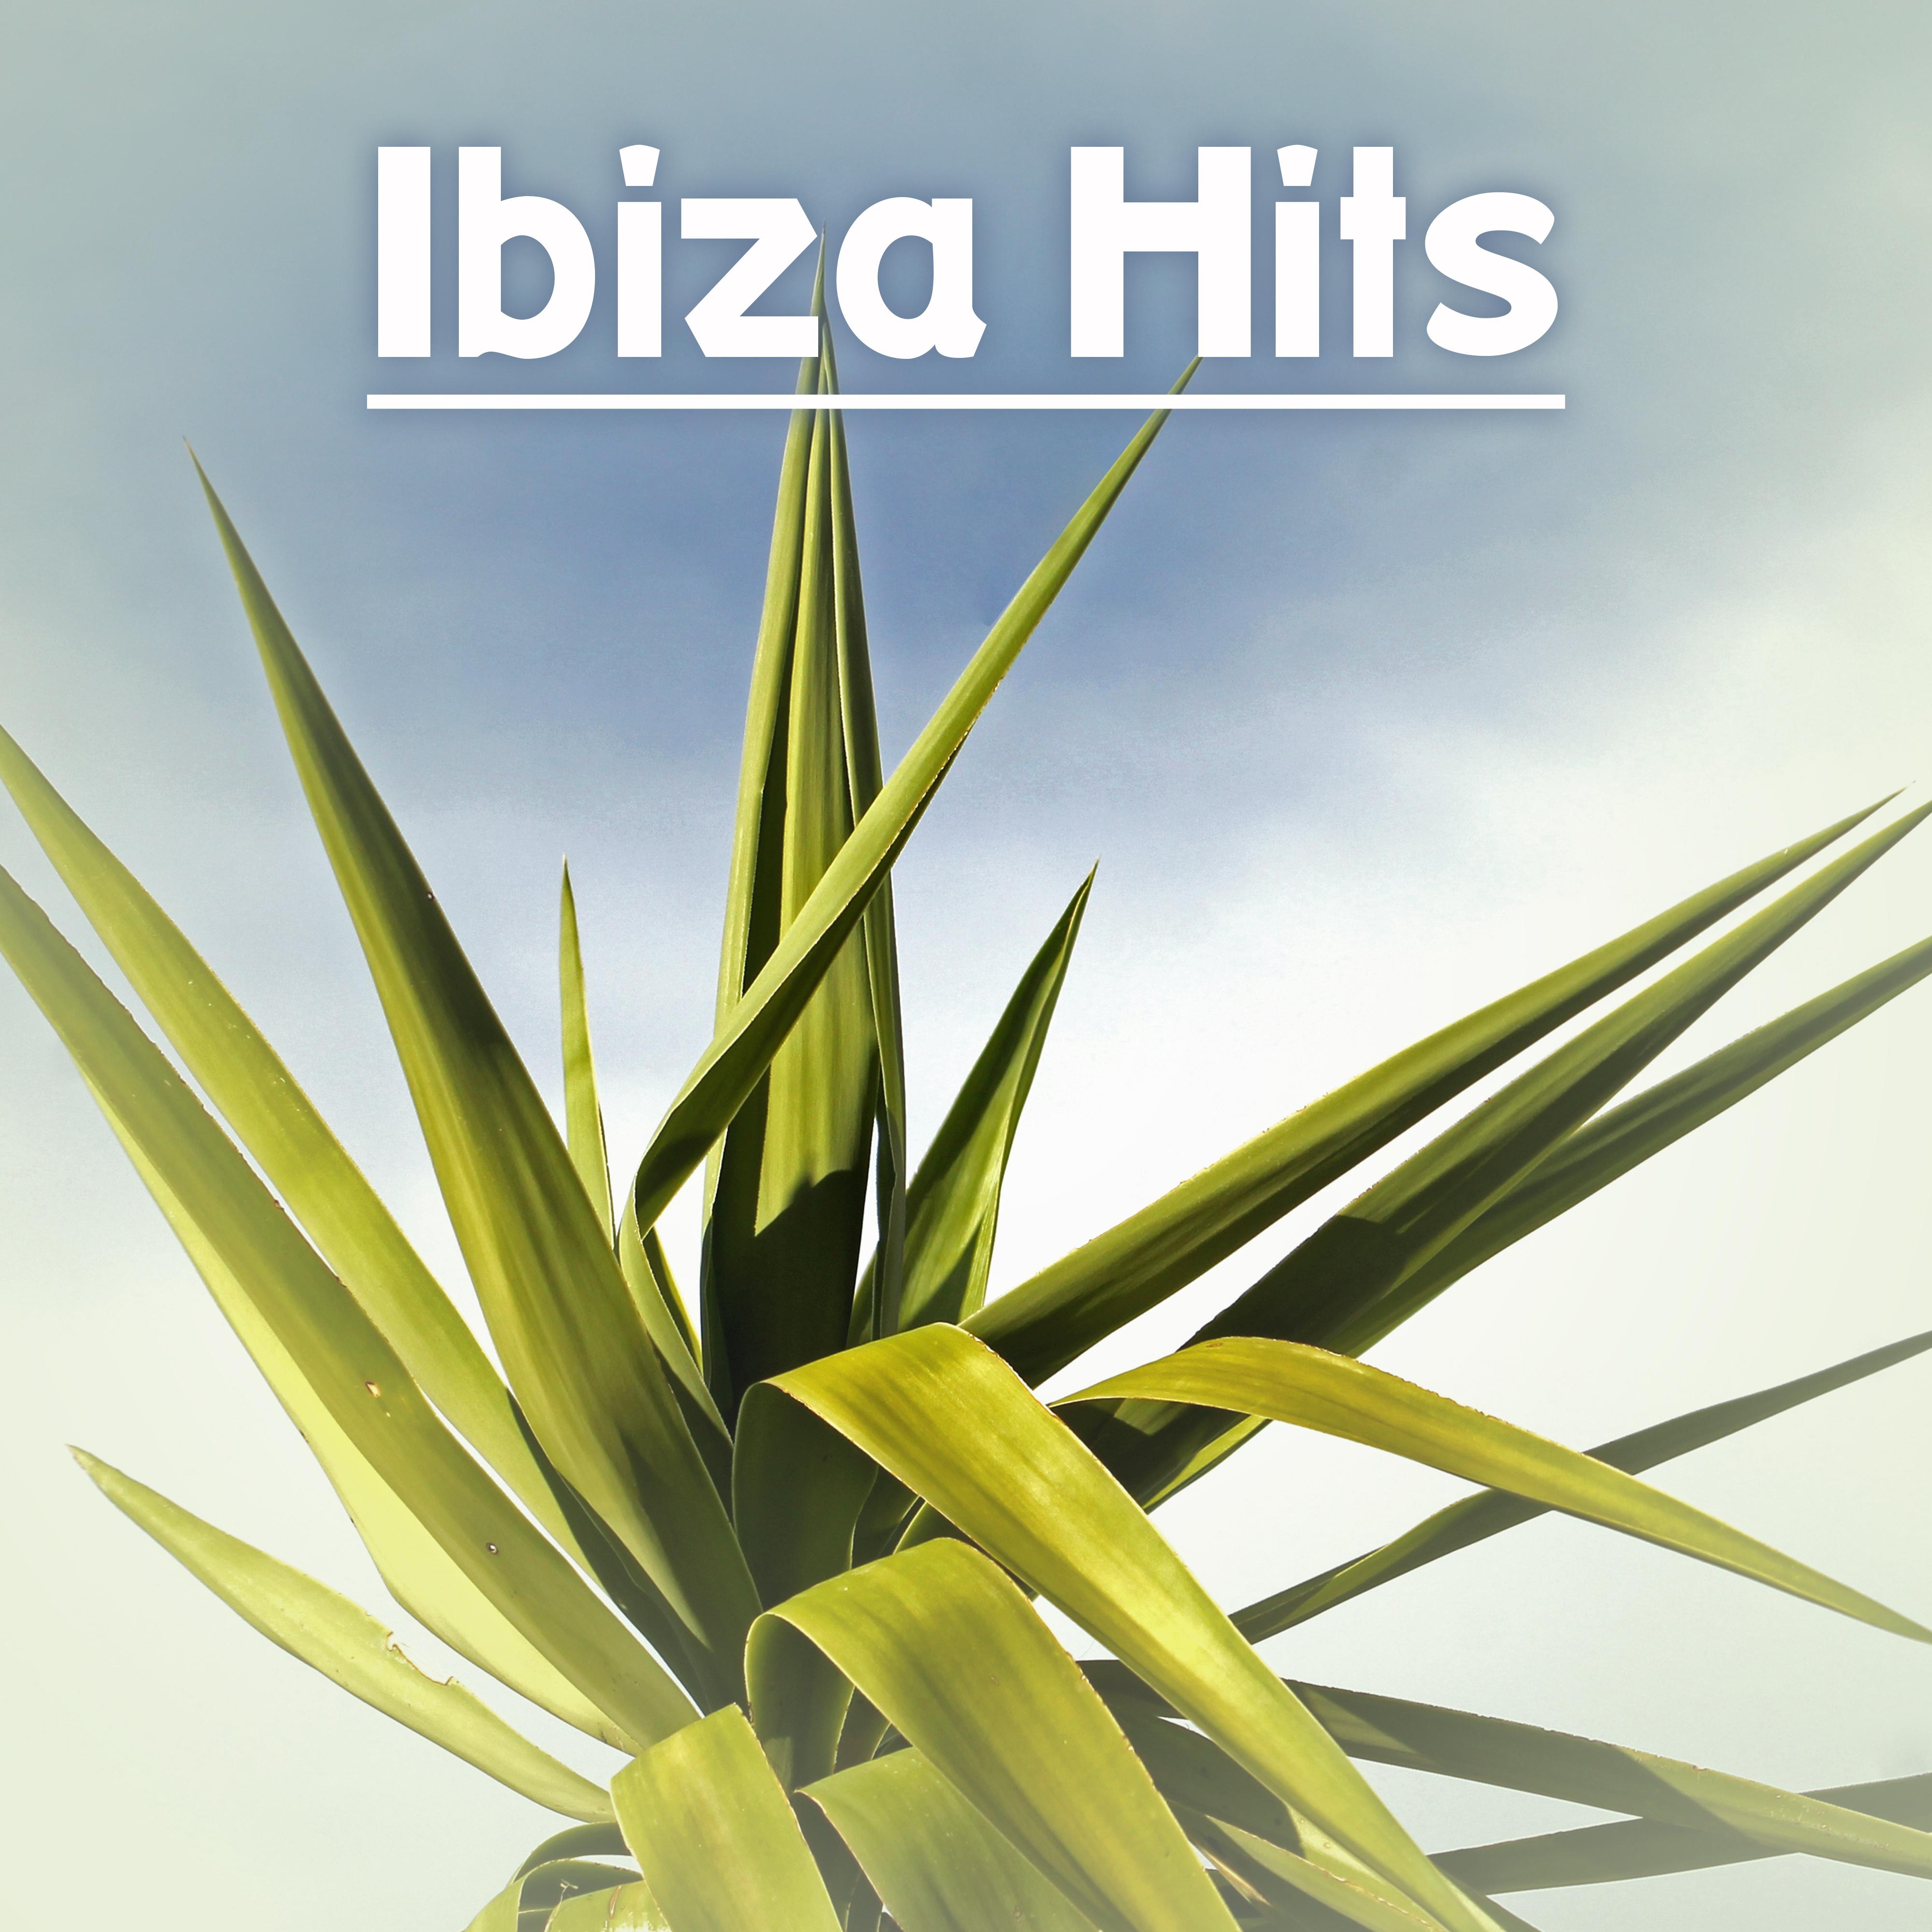 Ibiza Hits  Best Chill Out Music, Sounds for Party, Beach Dancefloor, Hot Moves